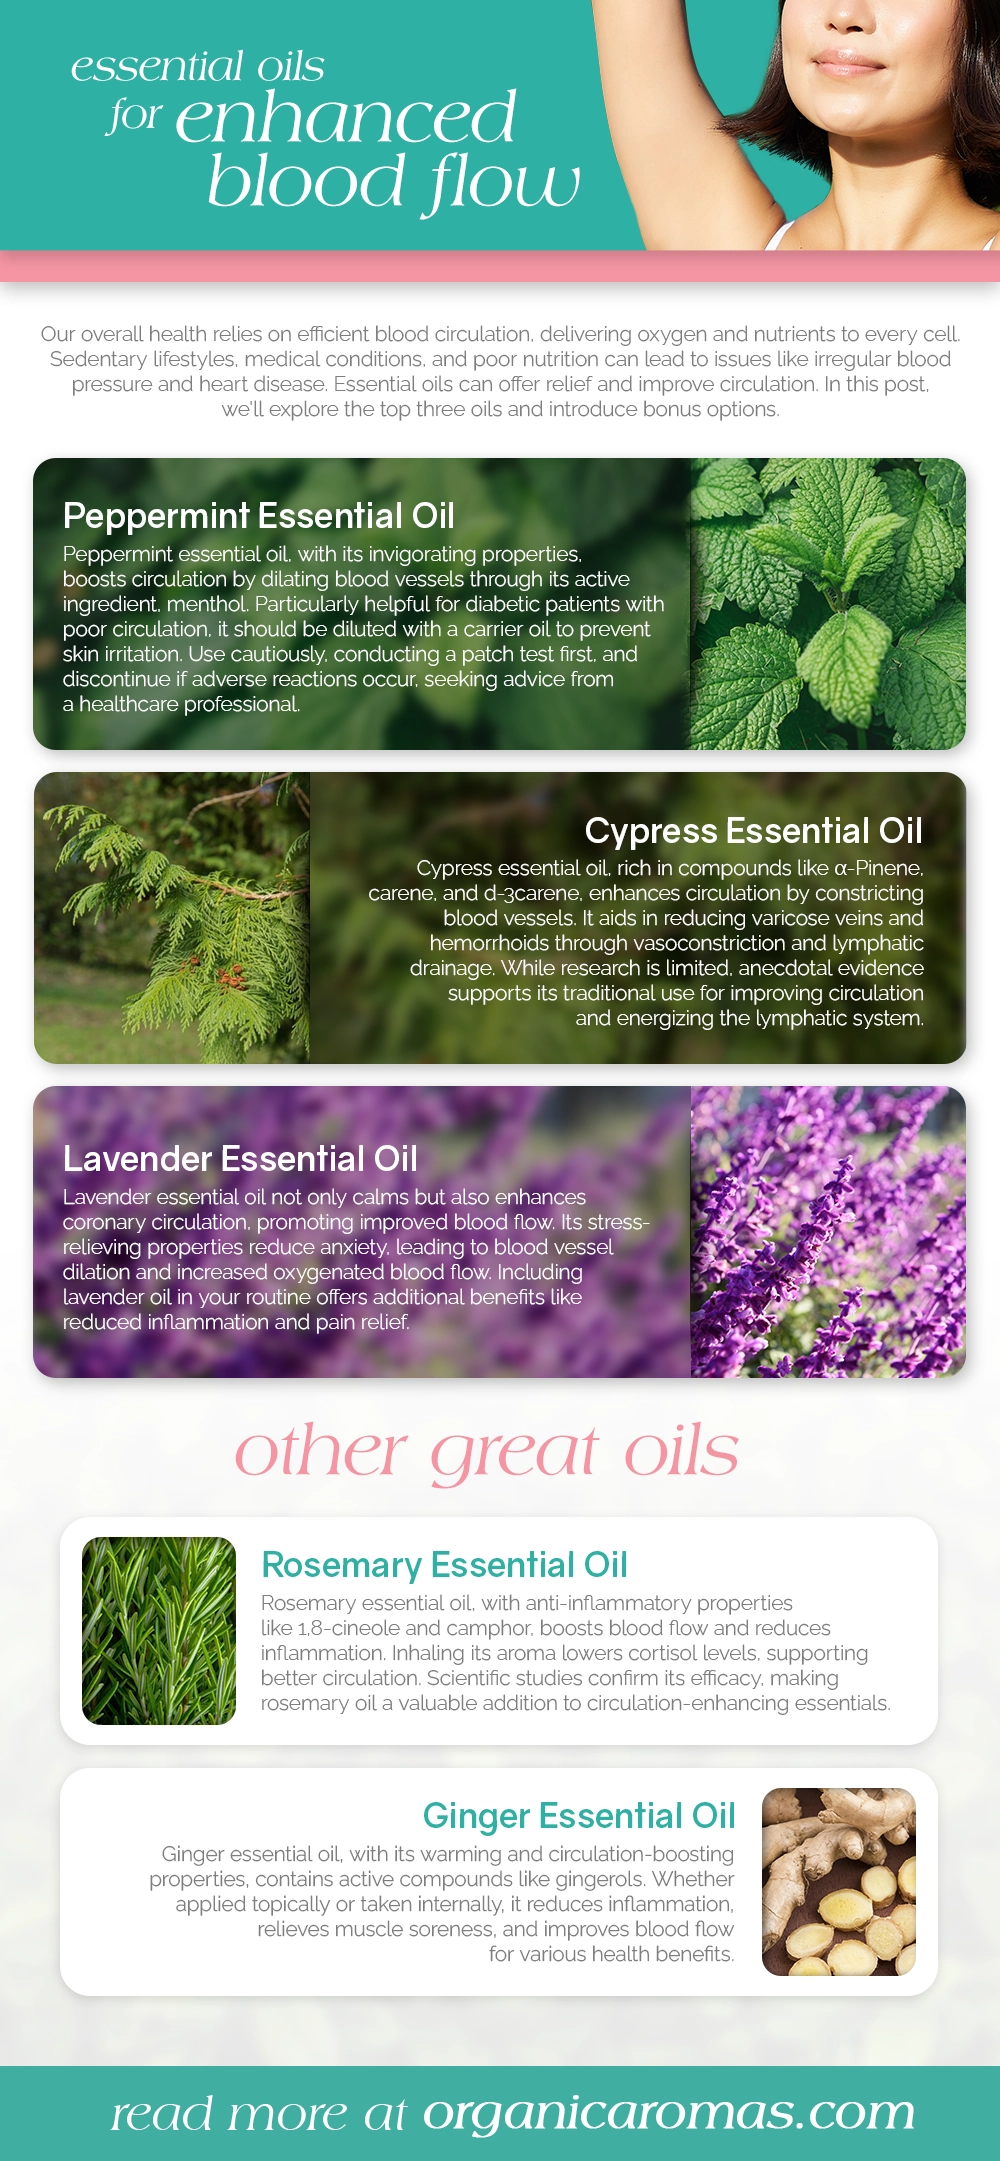 8 Best Essential Oils for Skin Problems & How to Use Them